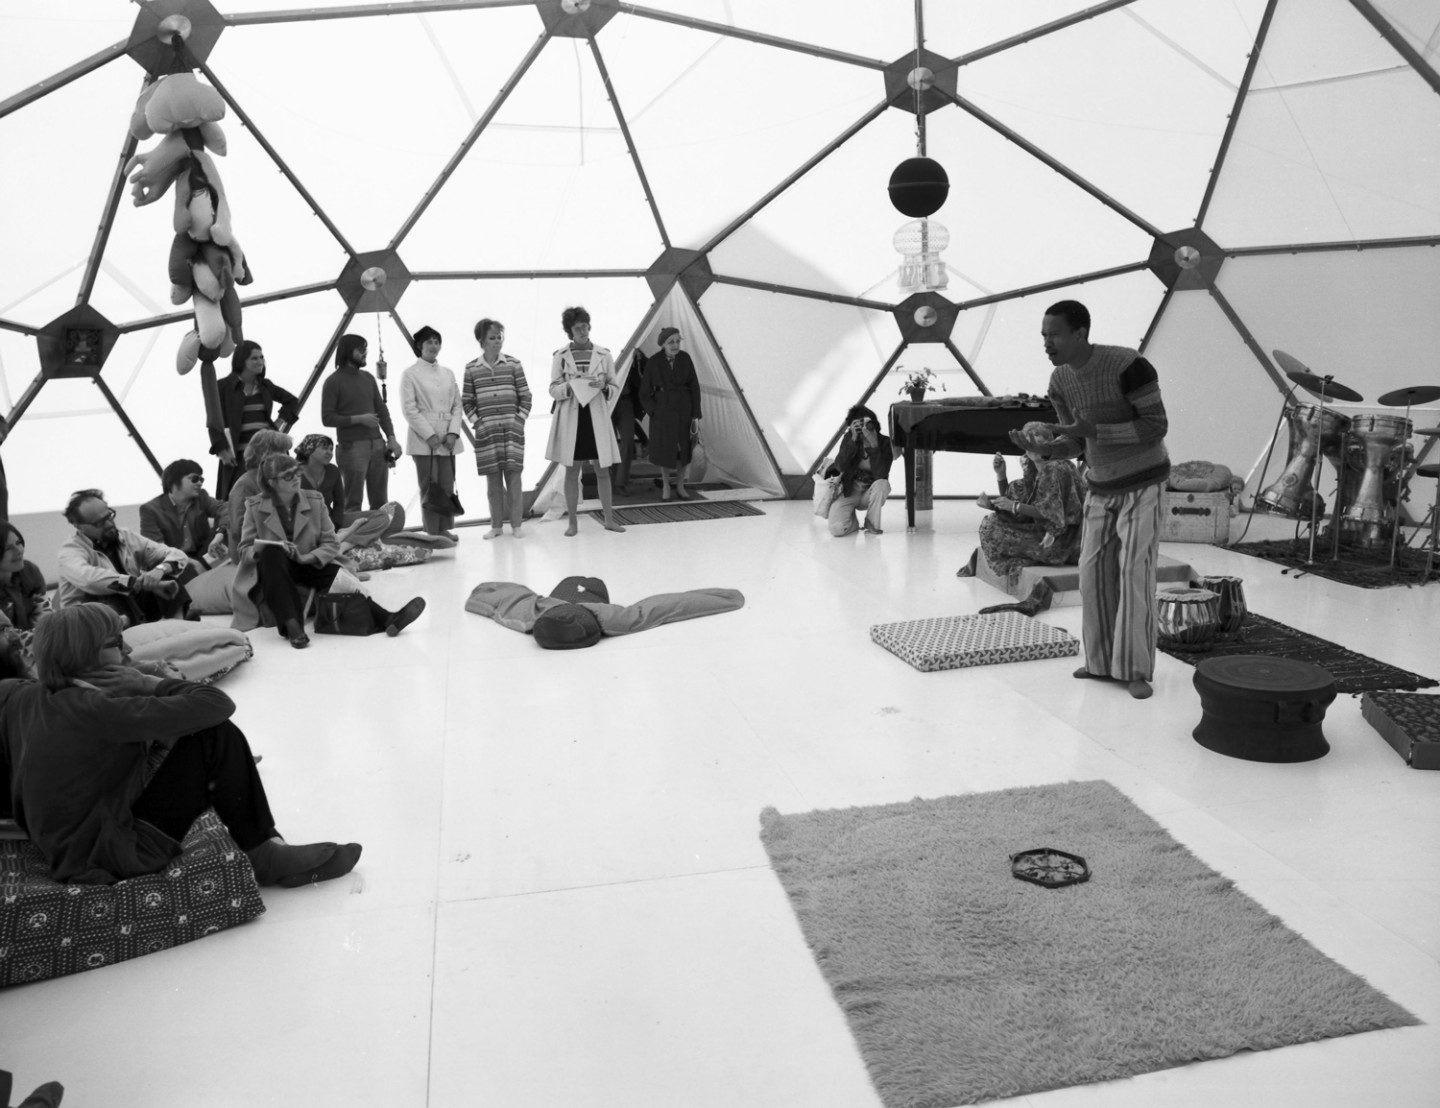 Concert in the geodesic dome